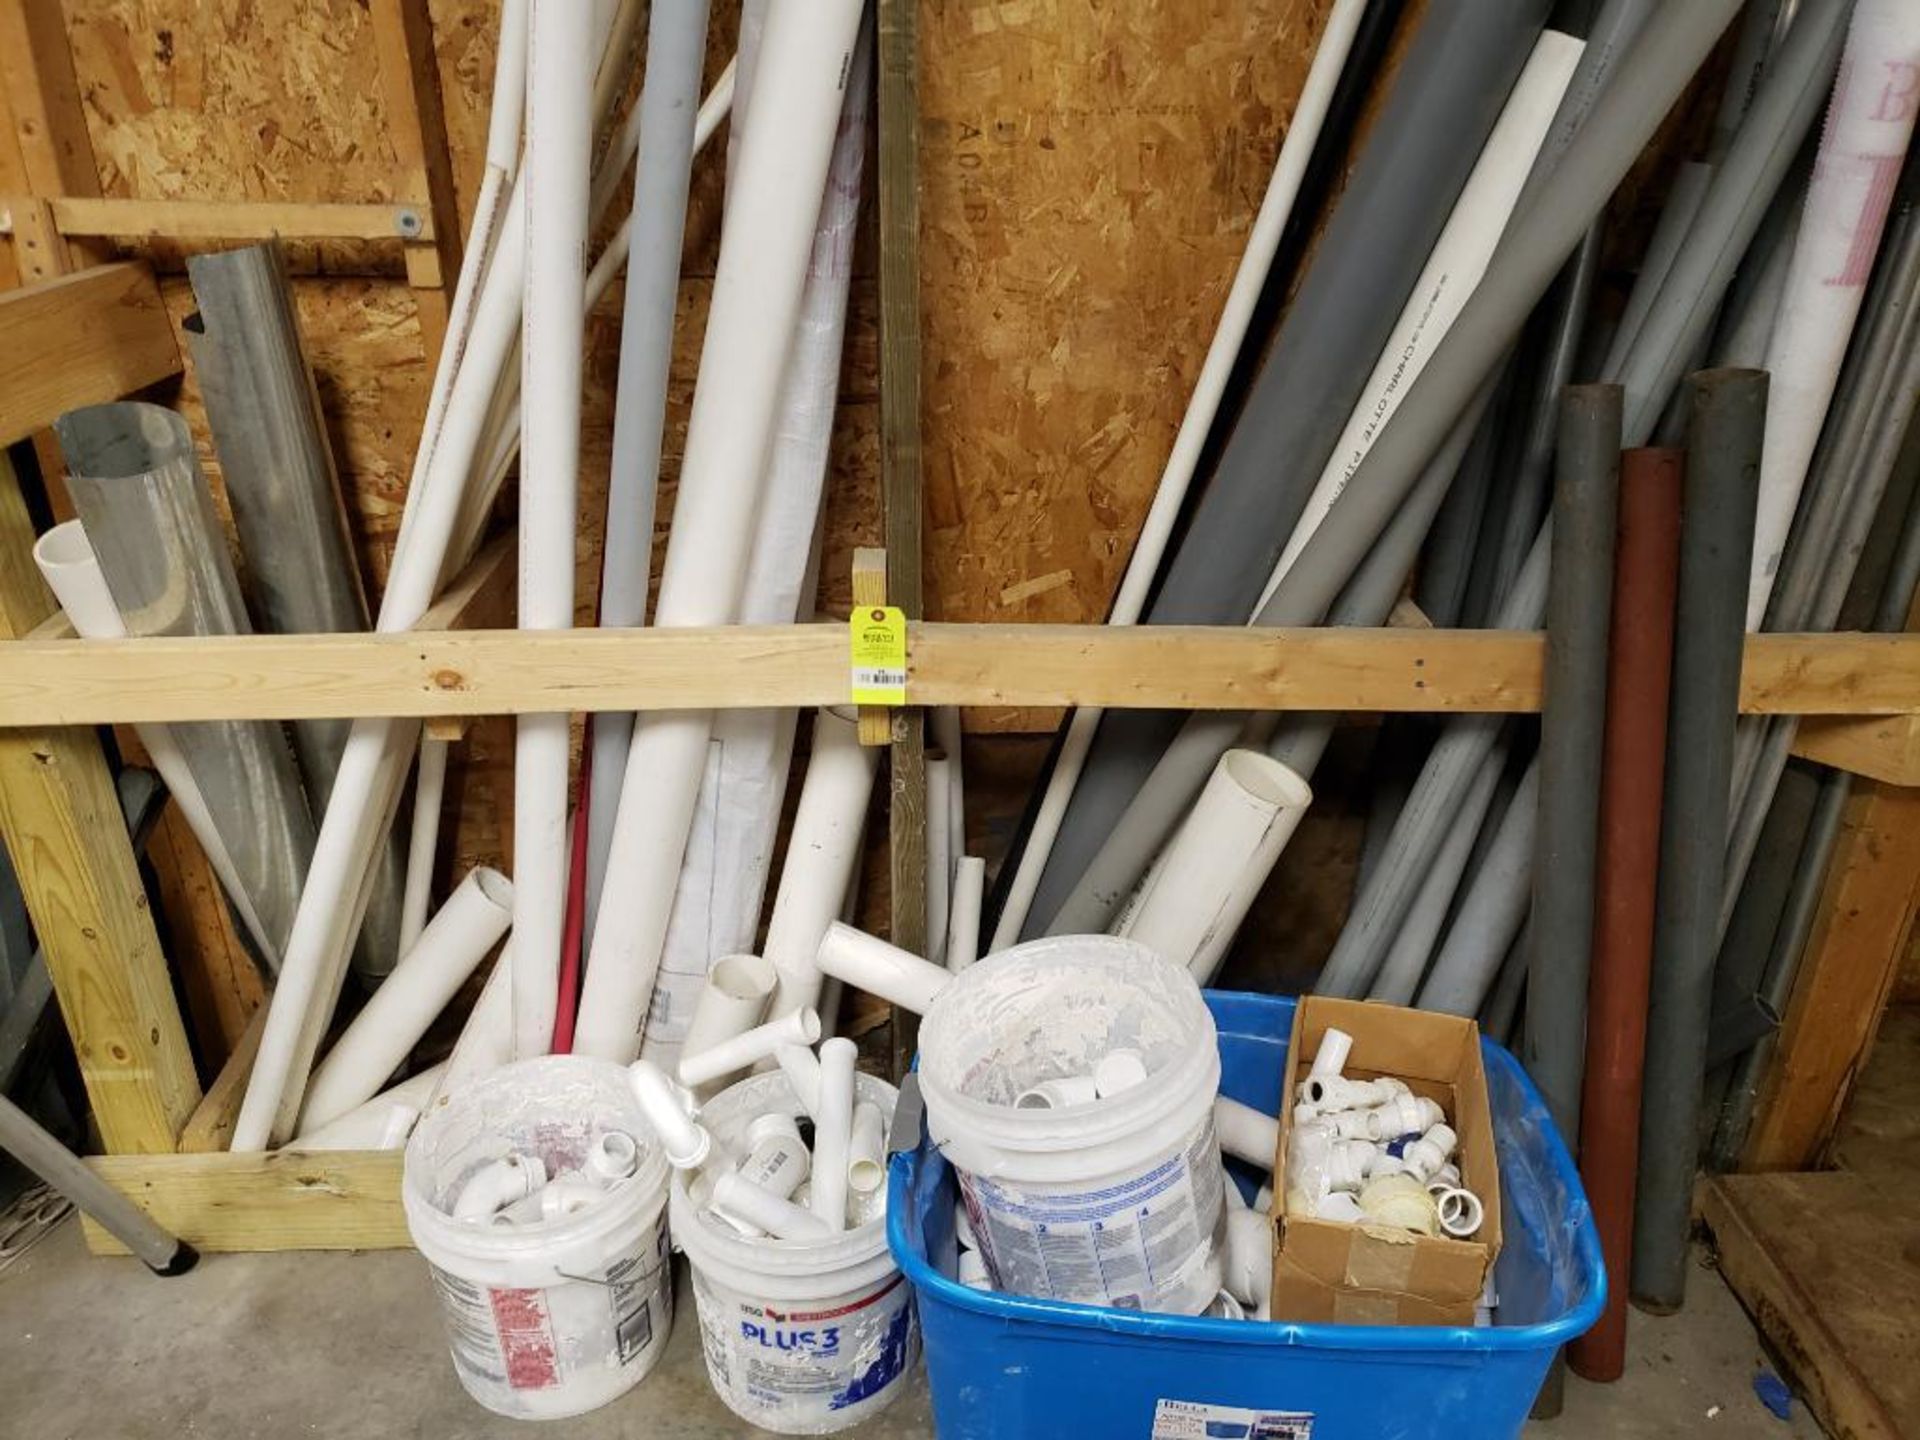 Large assortment of pvc tubing, fittings, pipes, etc.